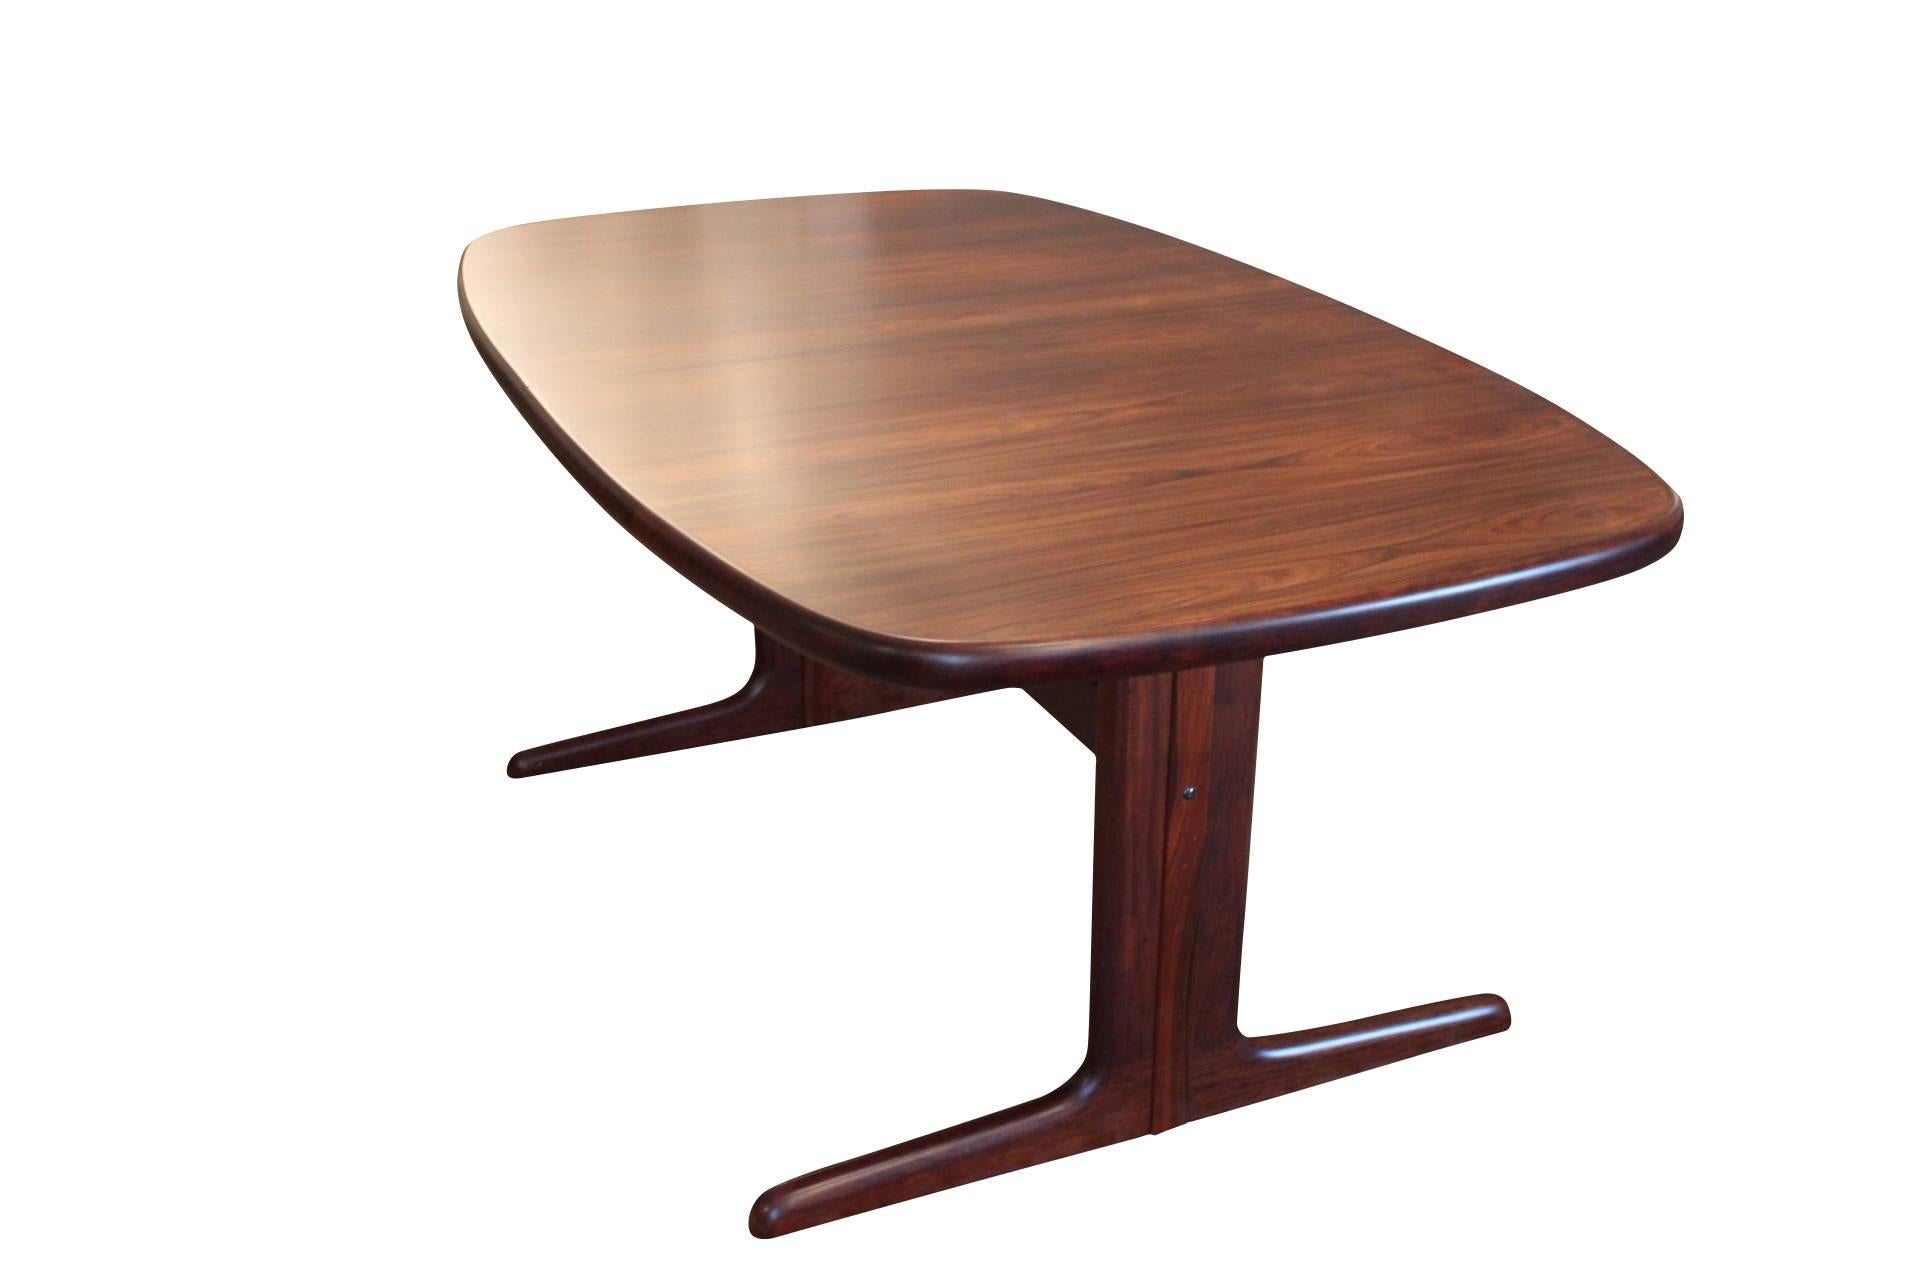 Dining table no. 74 by Skovby furniture factory in Classic ellipse shape with two extensionleaves which are hidden under the tabletop. The table is in rosewood and seats 6-12 people. The table is of Danish design. 